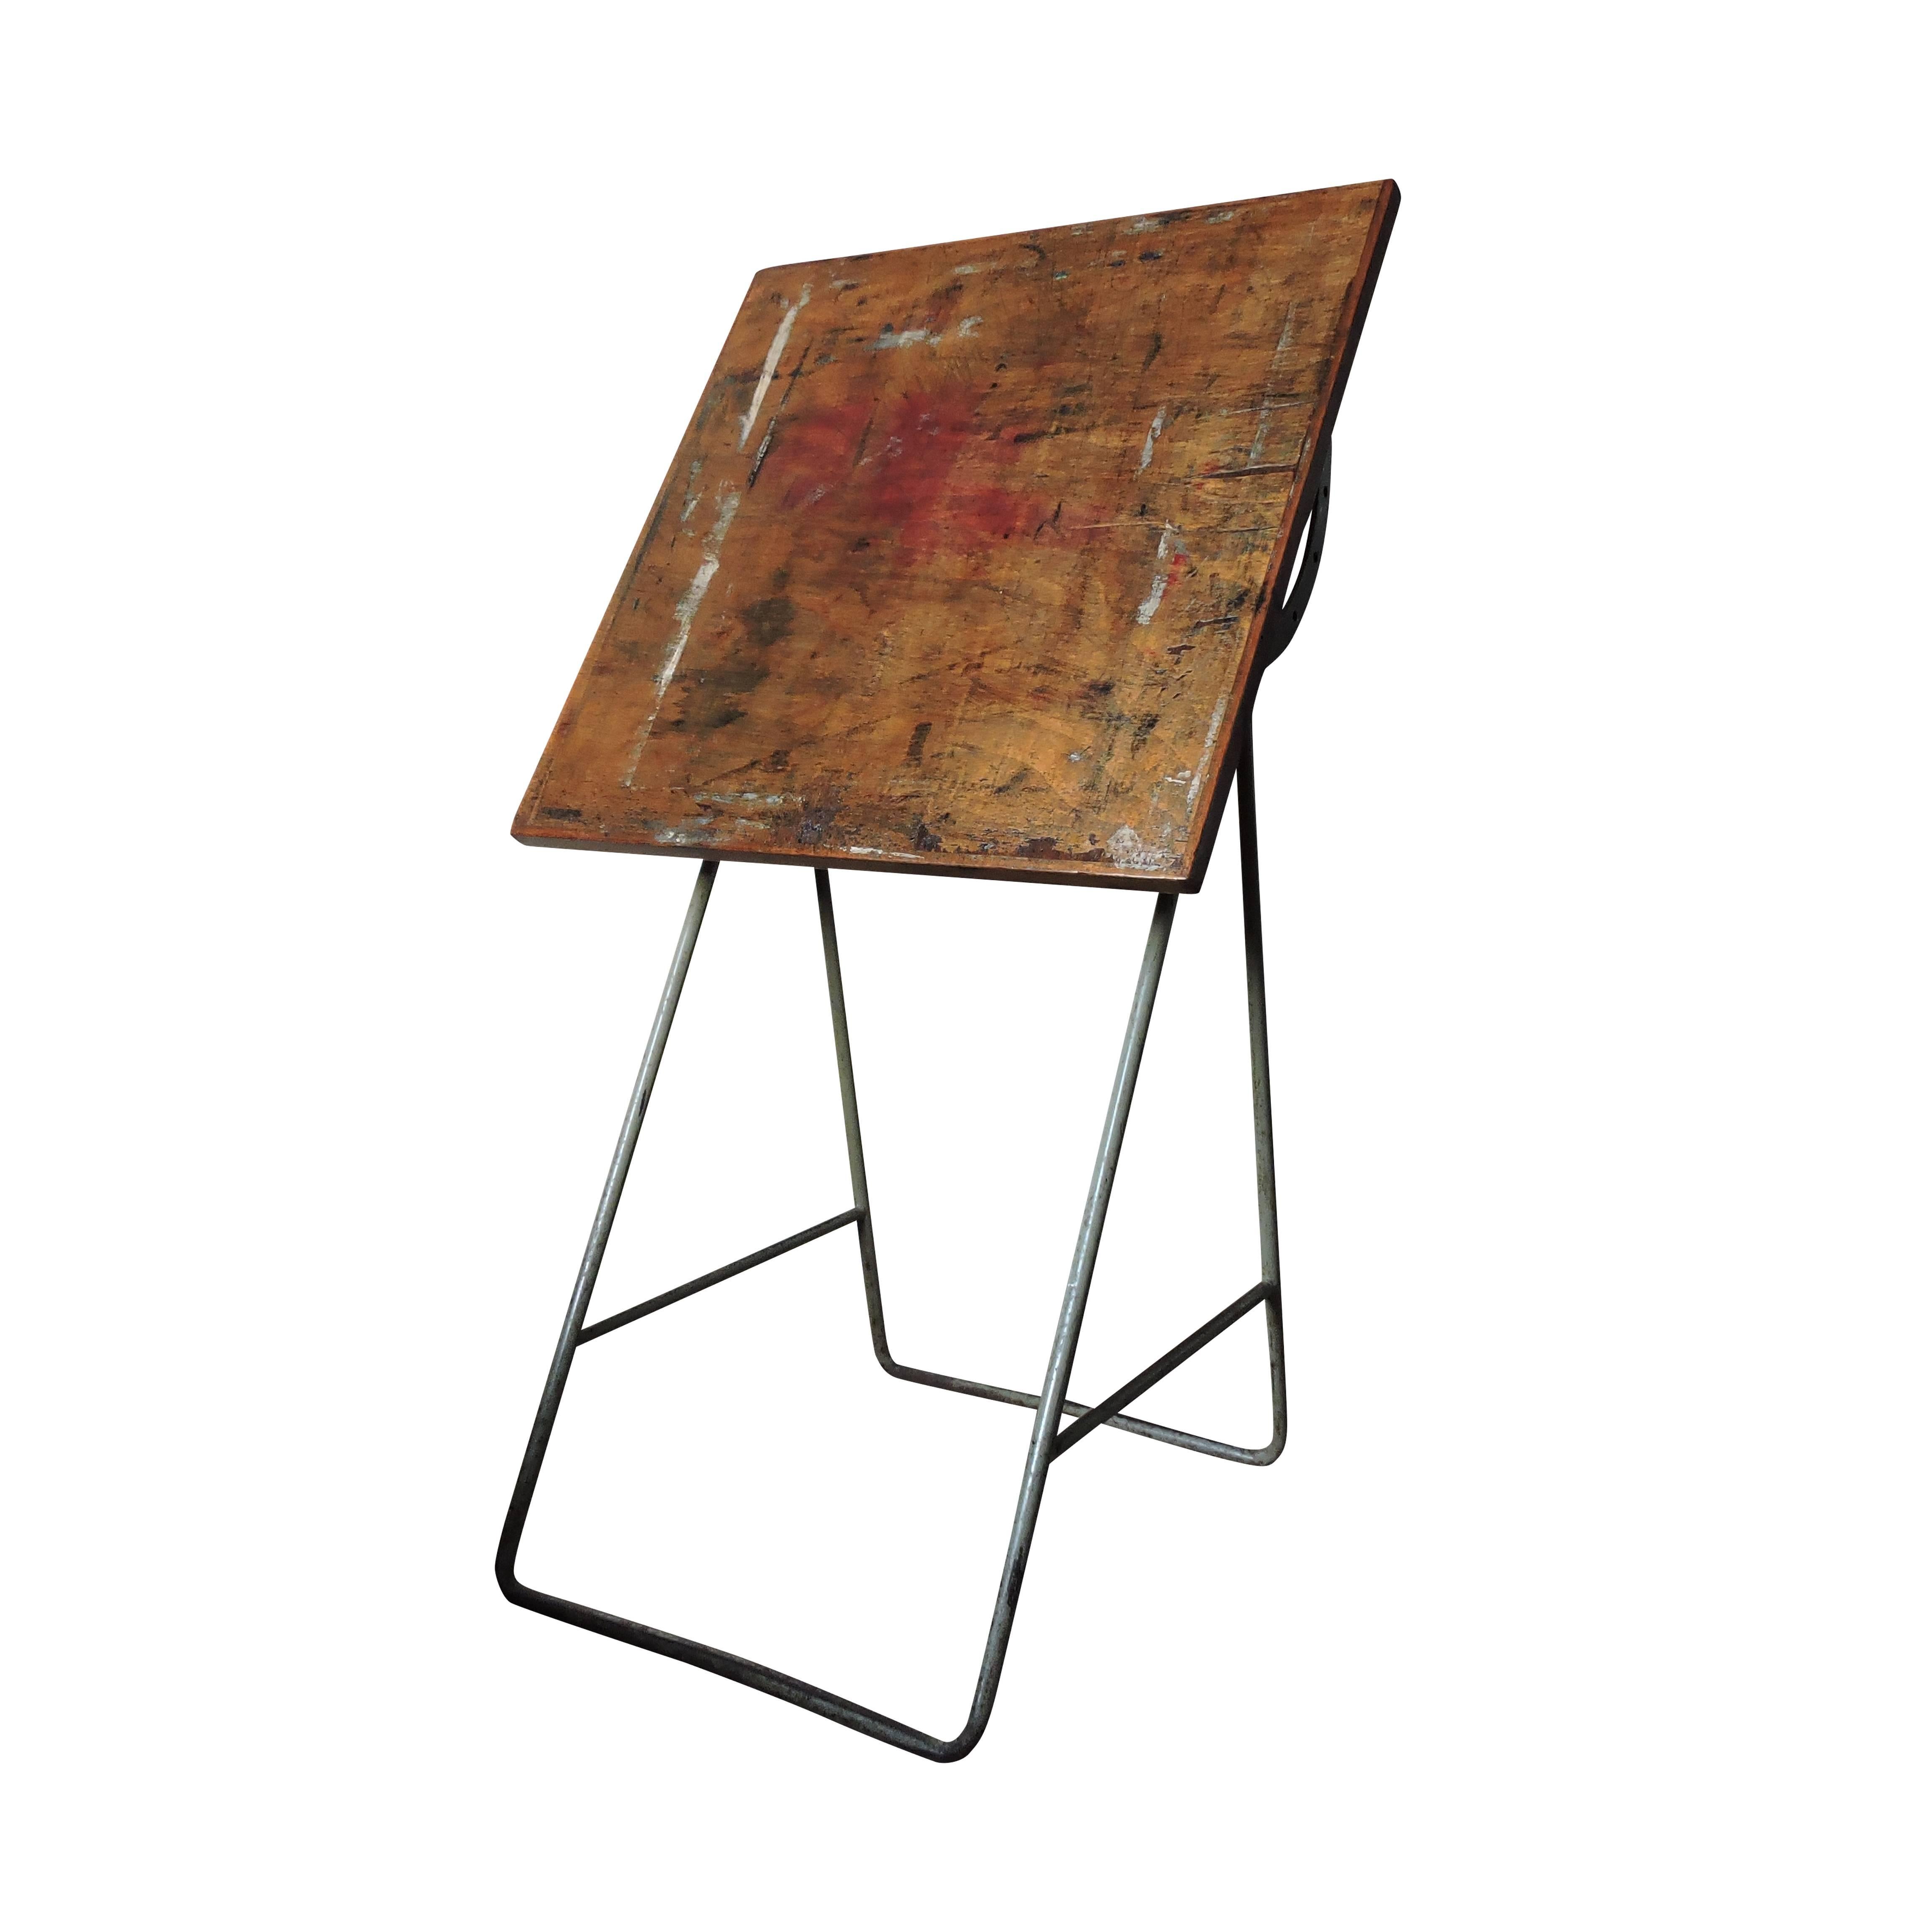 This wooden painting table is height adjustable and was made in Europe during the 1960s.